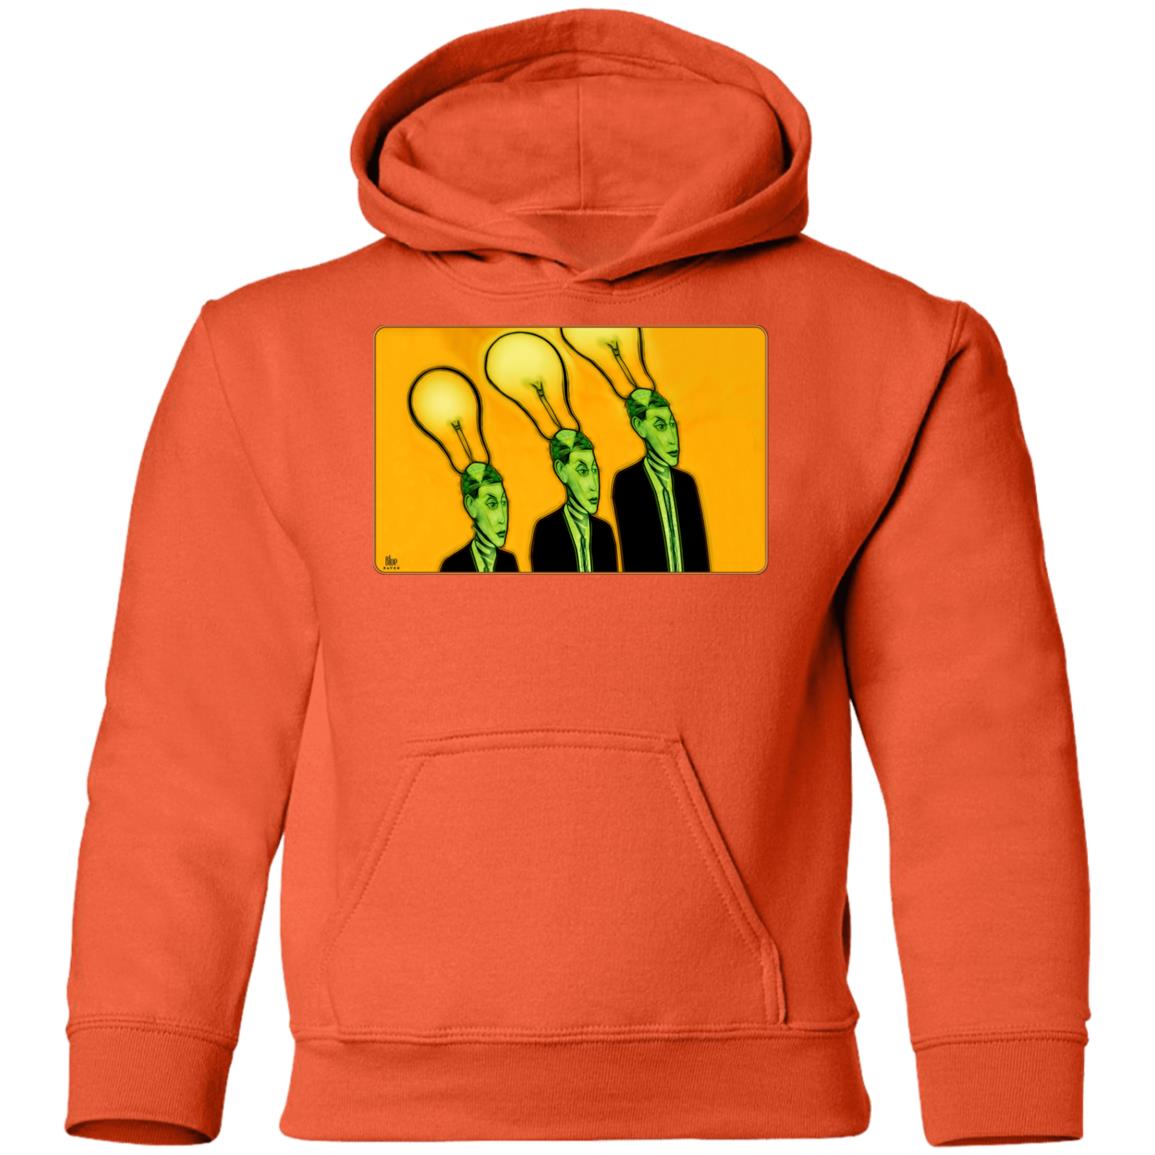 Brighter Idea - Youth Hoodie